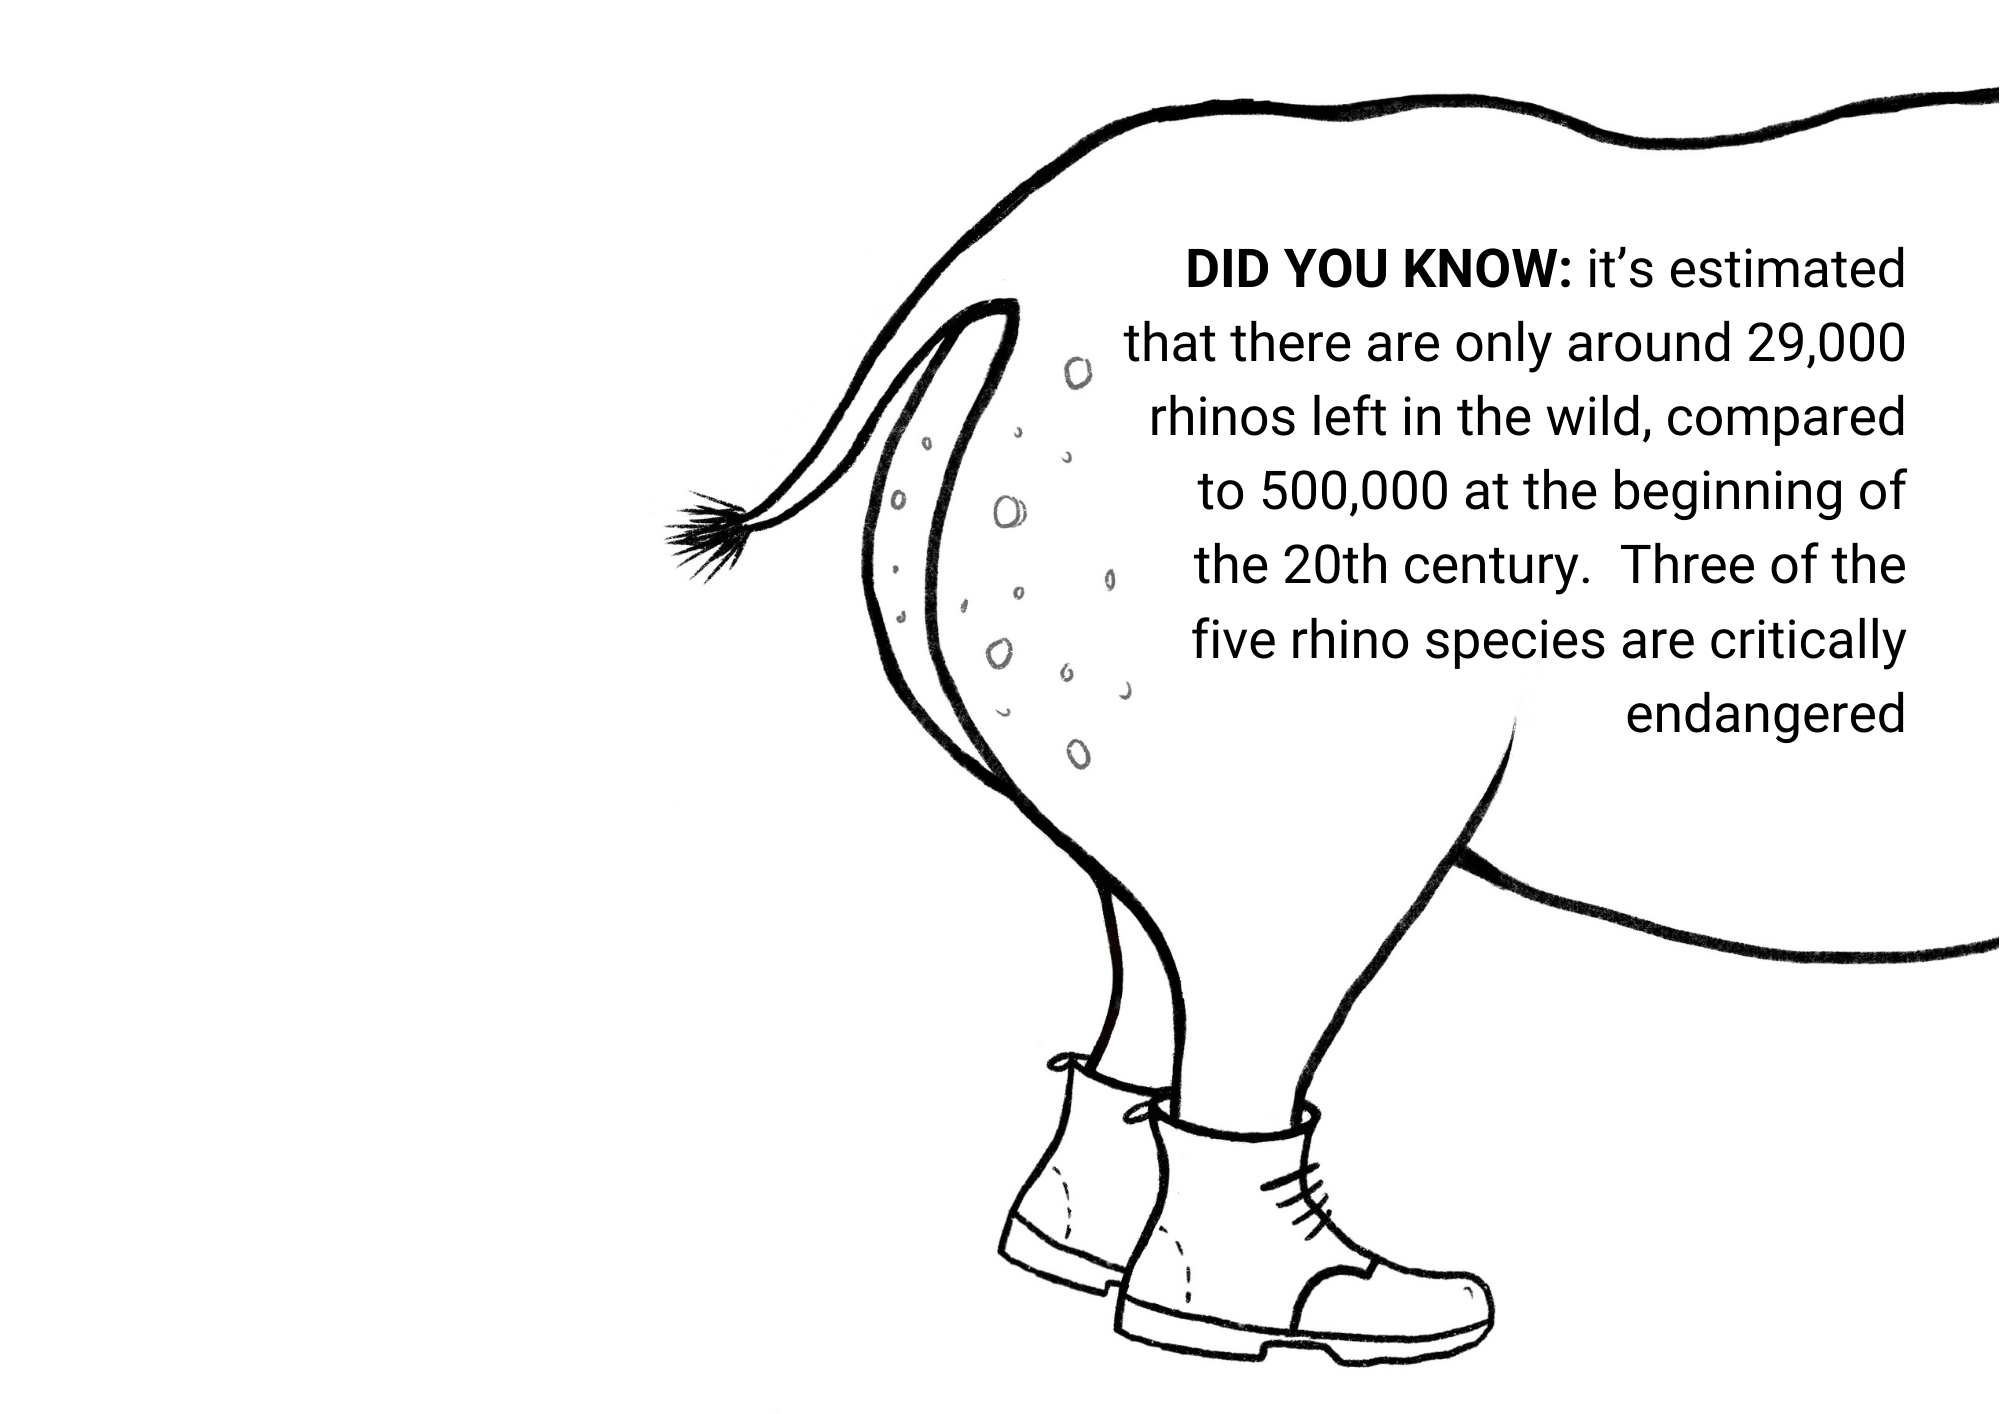 Illustration of a spotty rhino bum! It's wearing boots. Text over the top reads 'DID YOU KNOW: It's estimated that there are only around 29,000 rhinos left in the wild, compared to 500,000 at the beginning of the 20th century. Three of the five rhino species are critically endangered.'